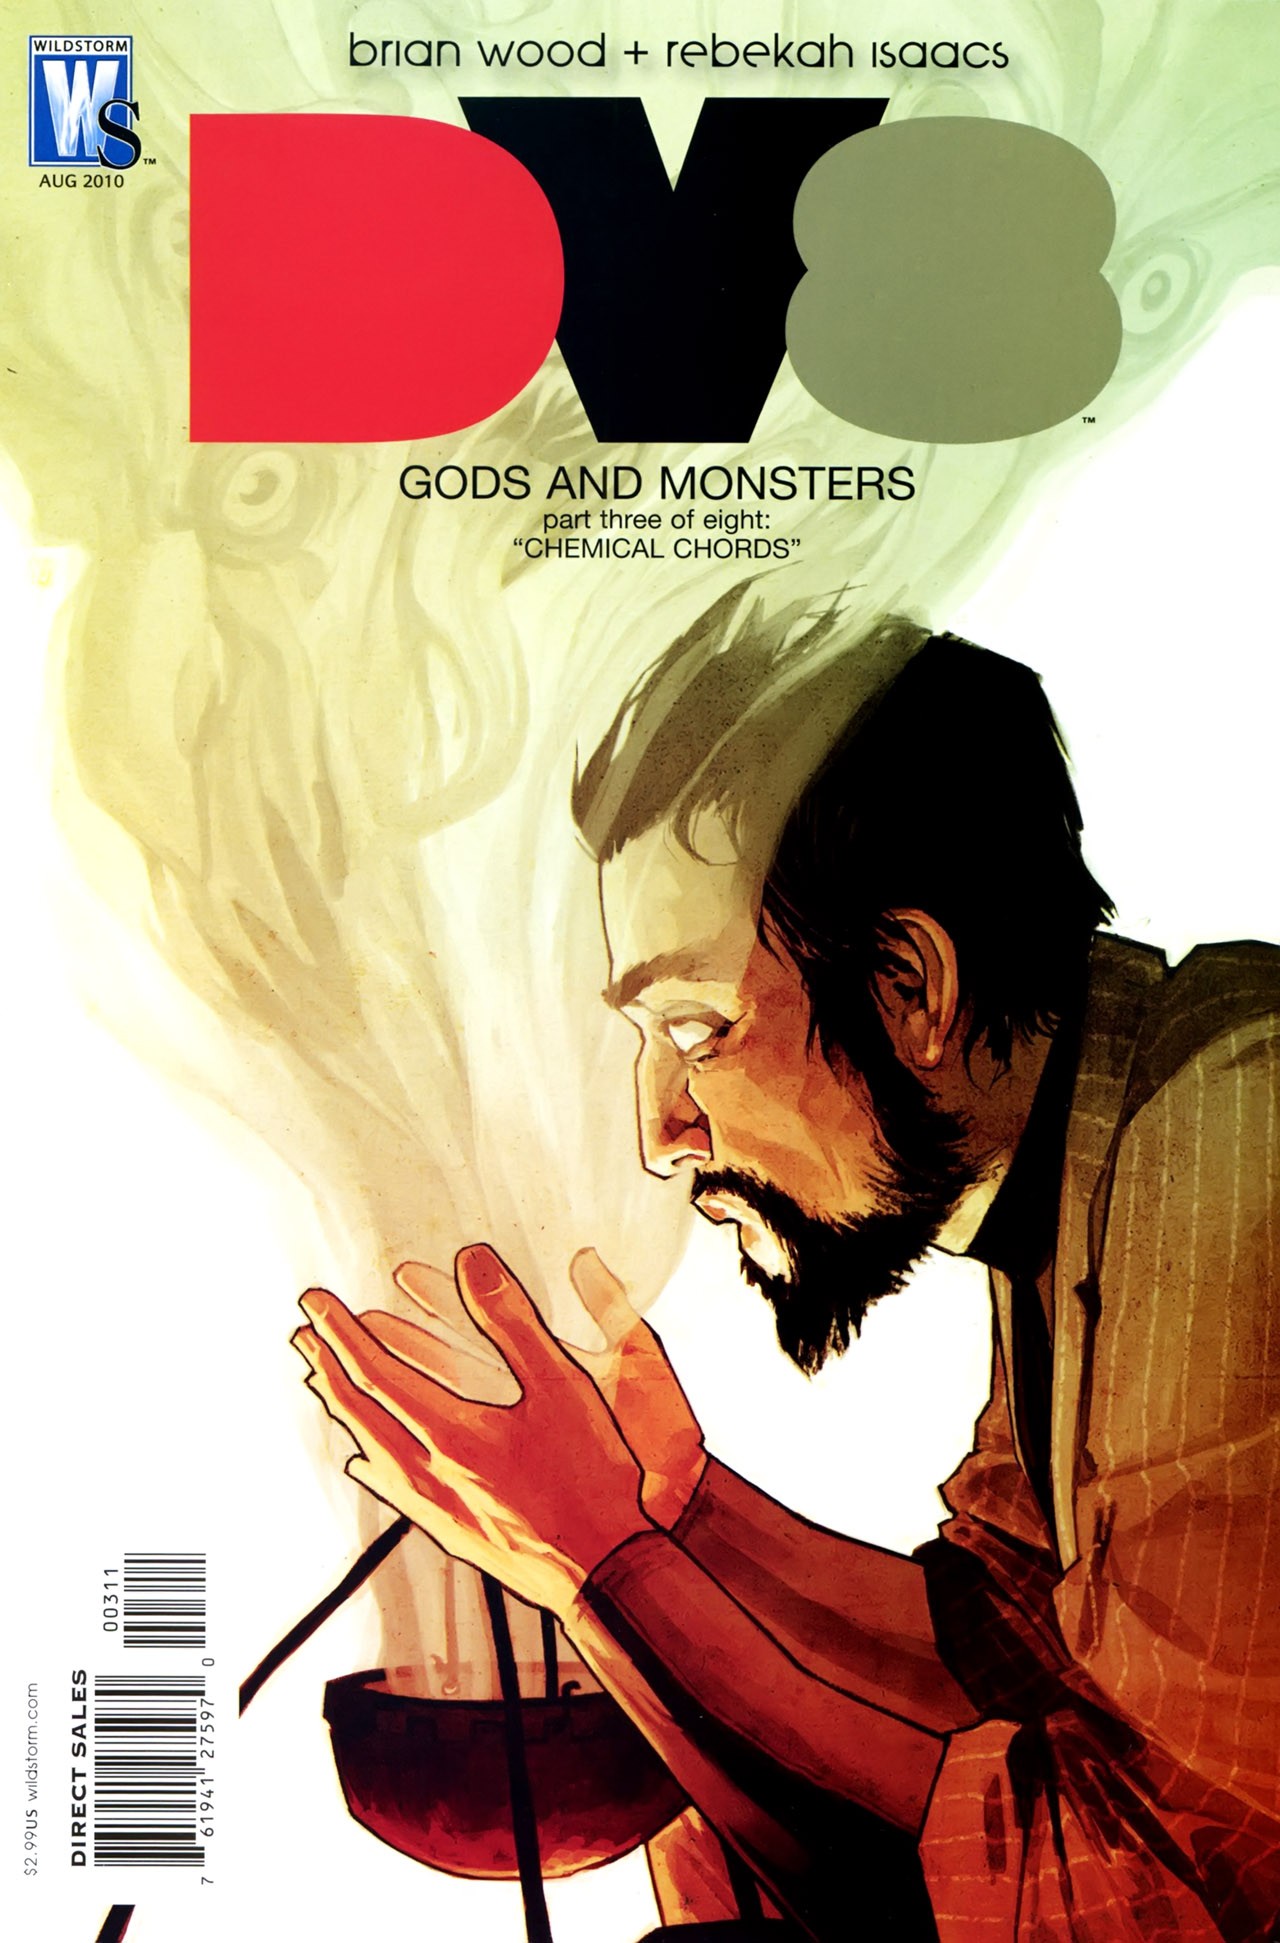 DV8: Gods and Monsters Vol. 1 #3